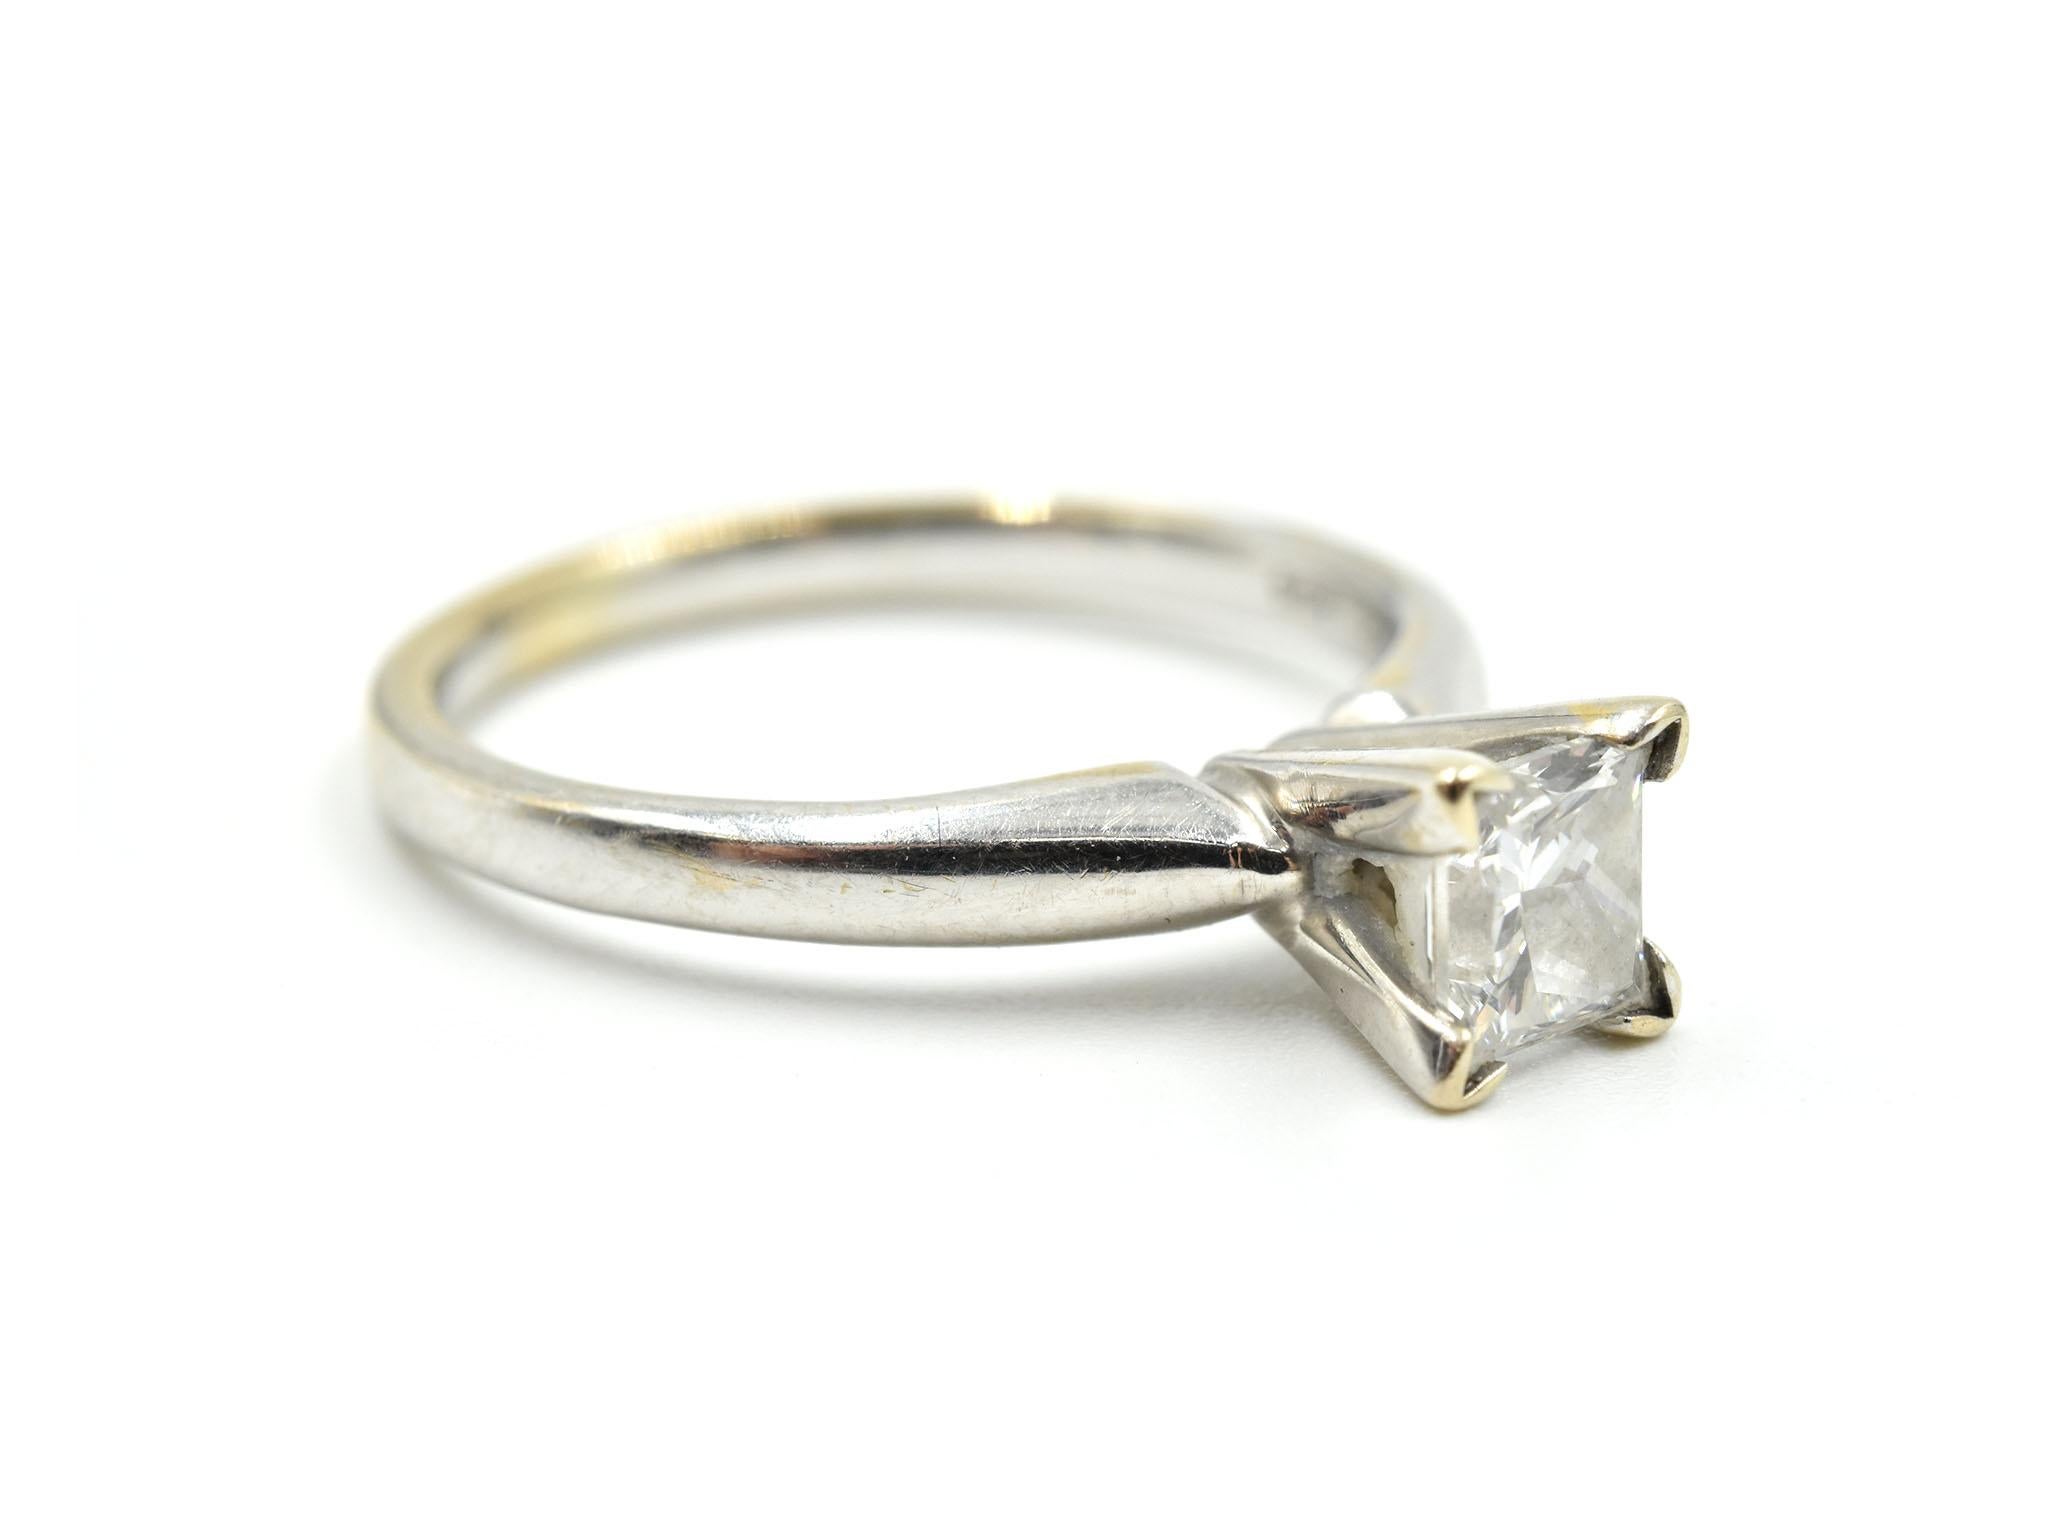 This classic engagement ring features a princess-cut diamond set into a 14k white gold mounting. The diamond weighs 0.63ct, and it is graded I in color and SI1 in clarity. The ring measures 6mm wide, and it weighs 3.2 grams. It is size 5.25.